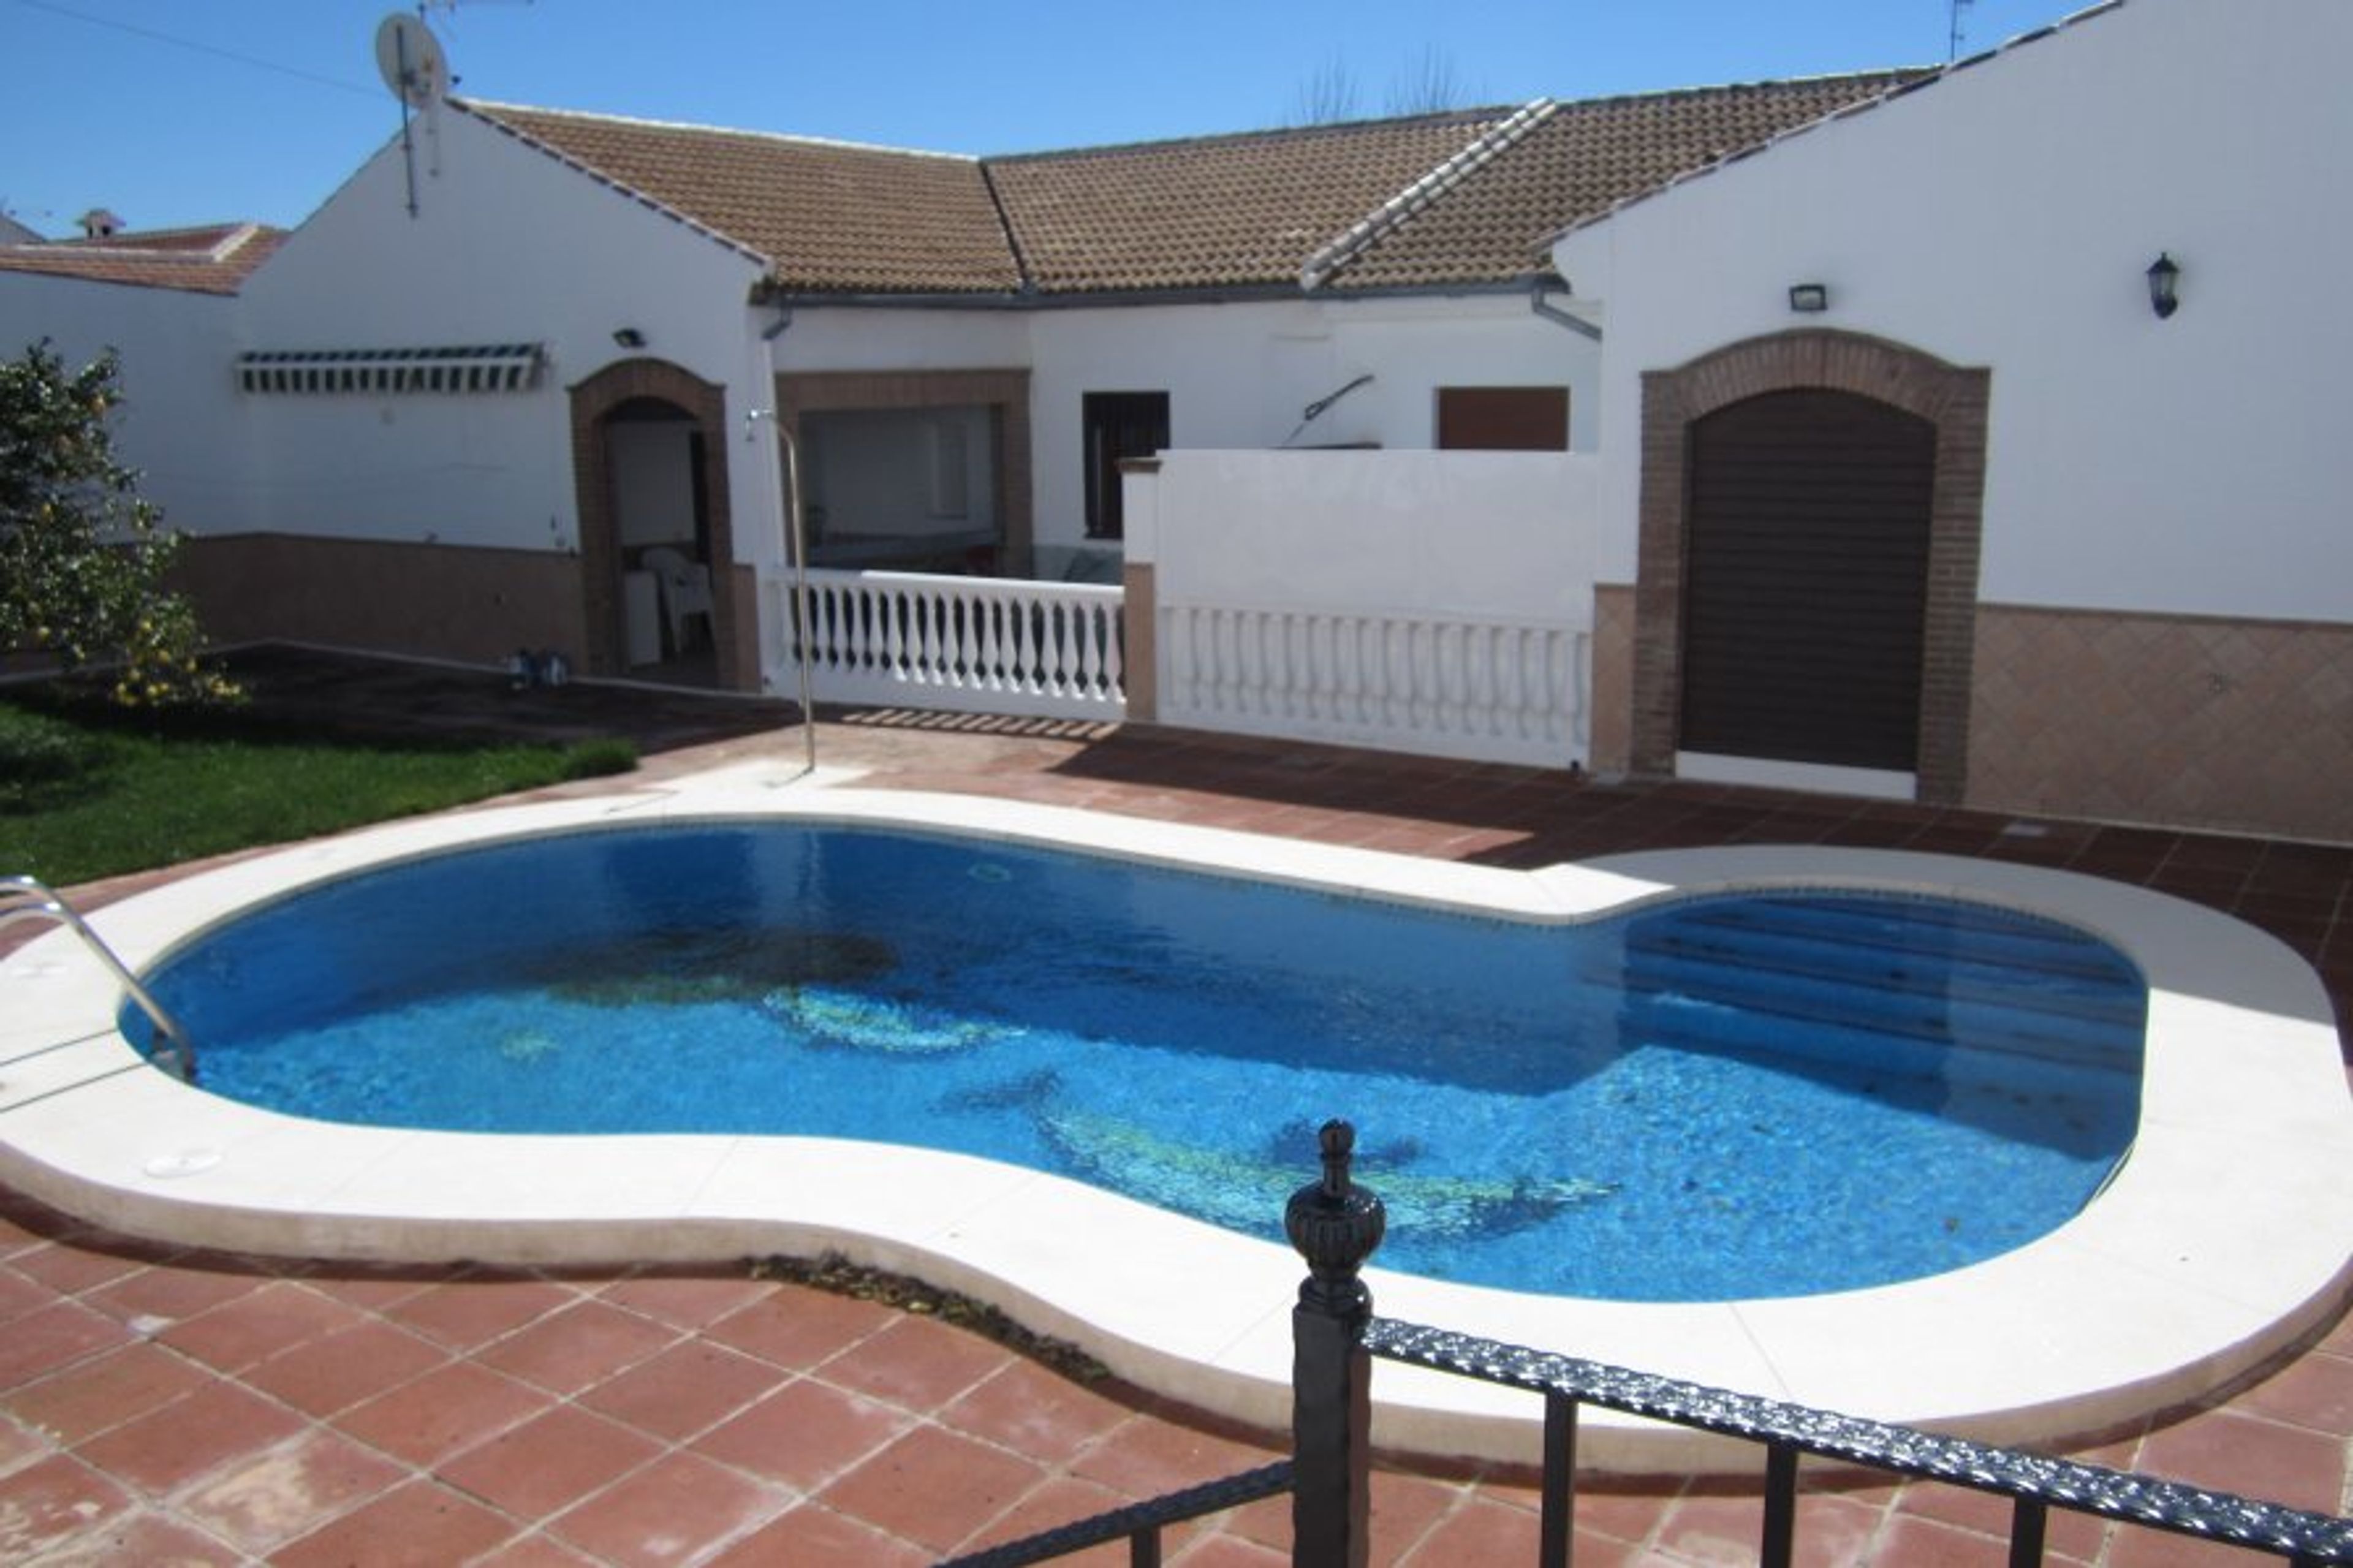 A view of the pool and garden at the back of Casa Ventarga